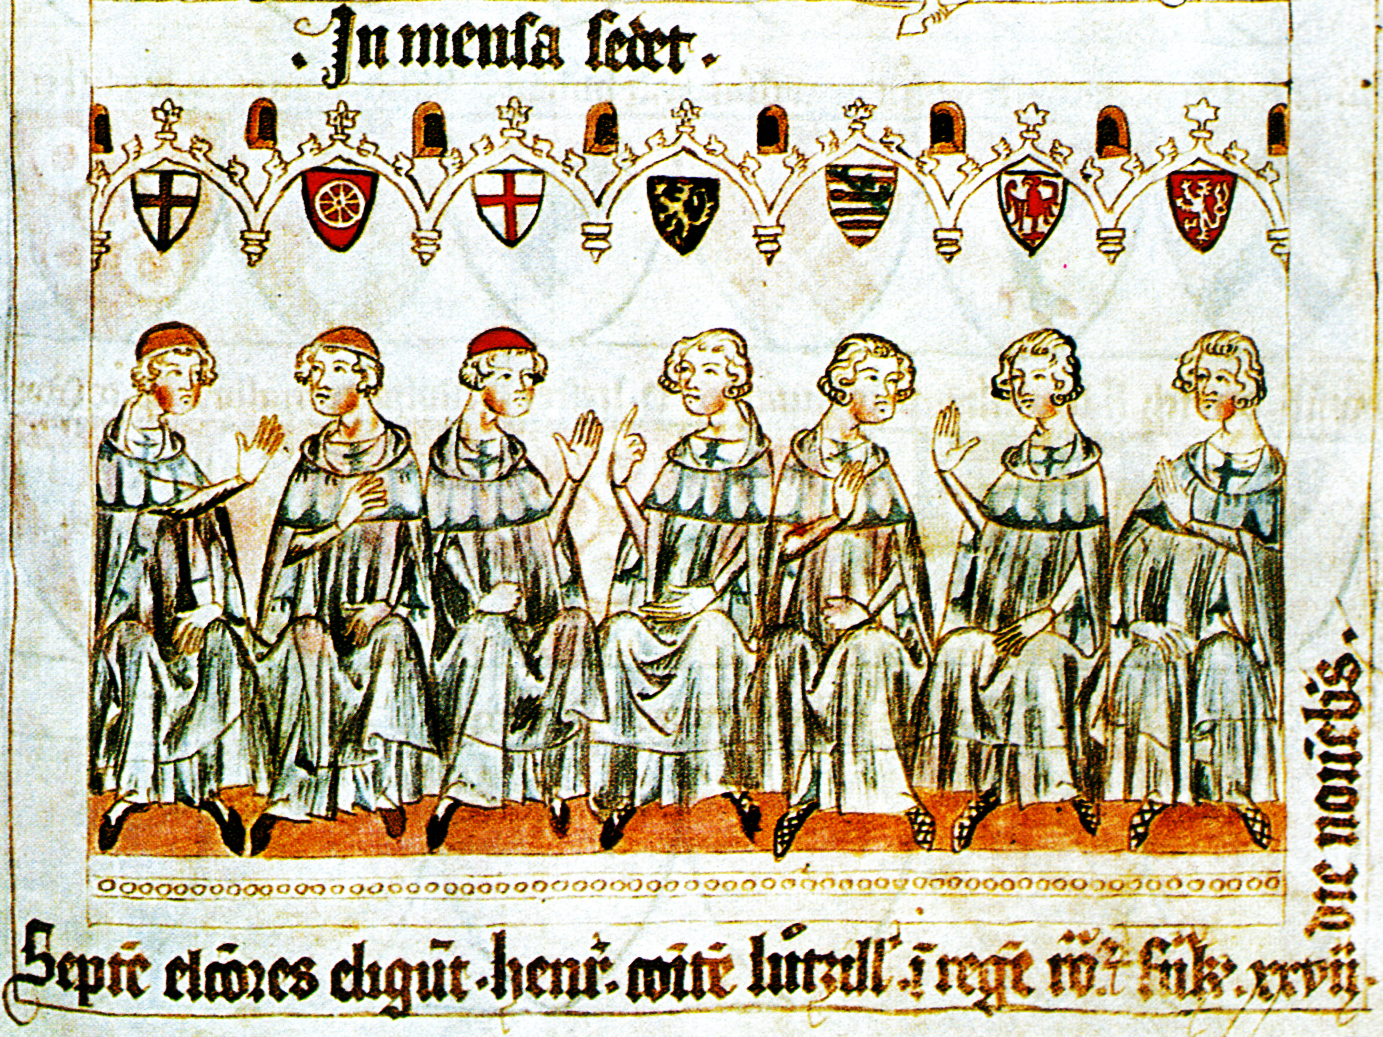 An illustrated manuscript depicting the 'Seven Prince Electors' in medieval attire, sitting in a row. Each elector is raising one hand in a gesture of selection or affirmation. Above them are heraldic shields representing their territories. They are shown in the act of electing Henry, Count of Luxembourg as Henry VII, Holy Roman Emperor.